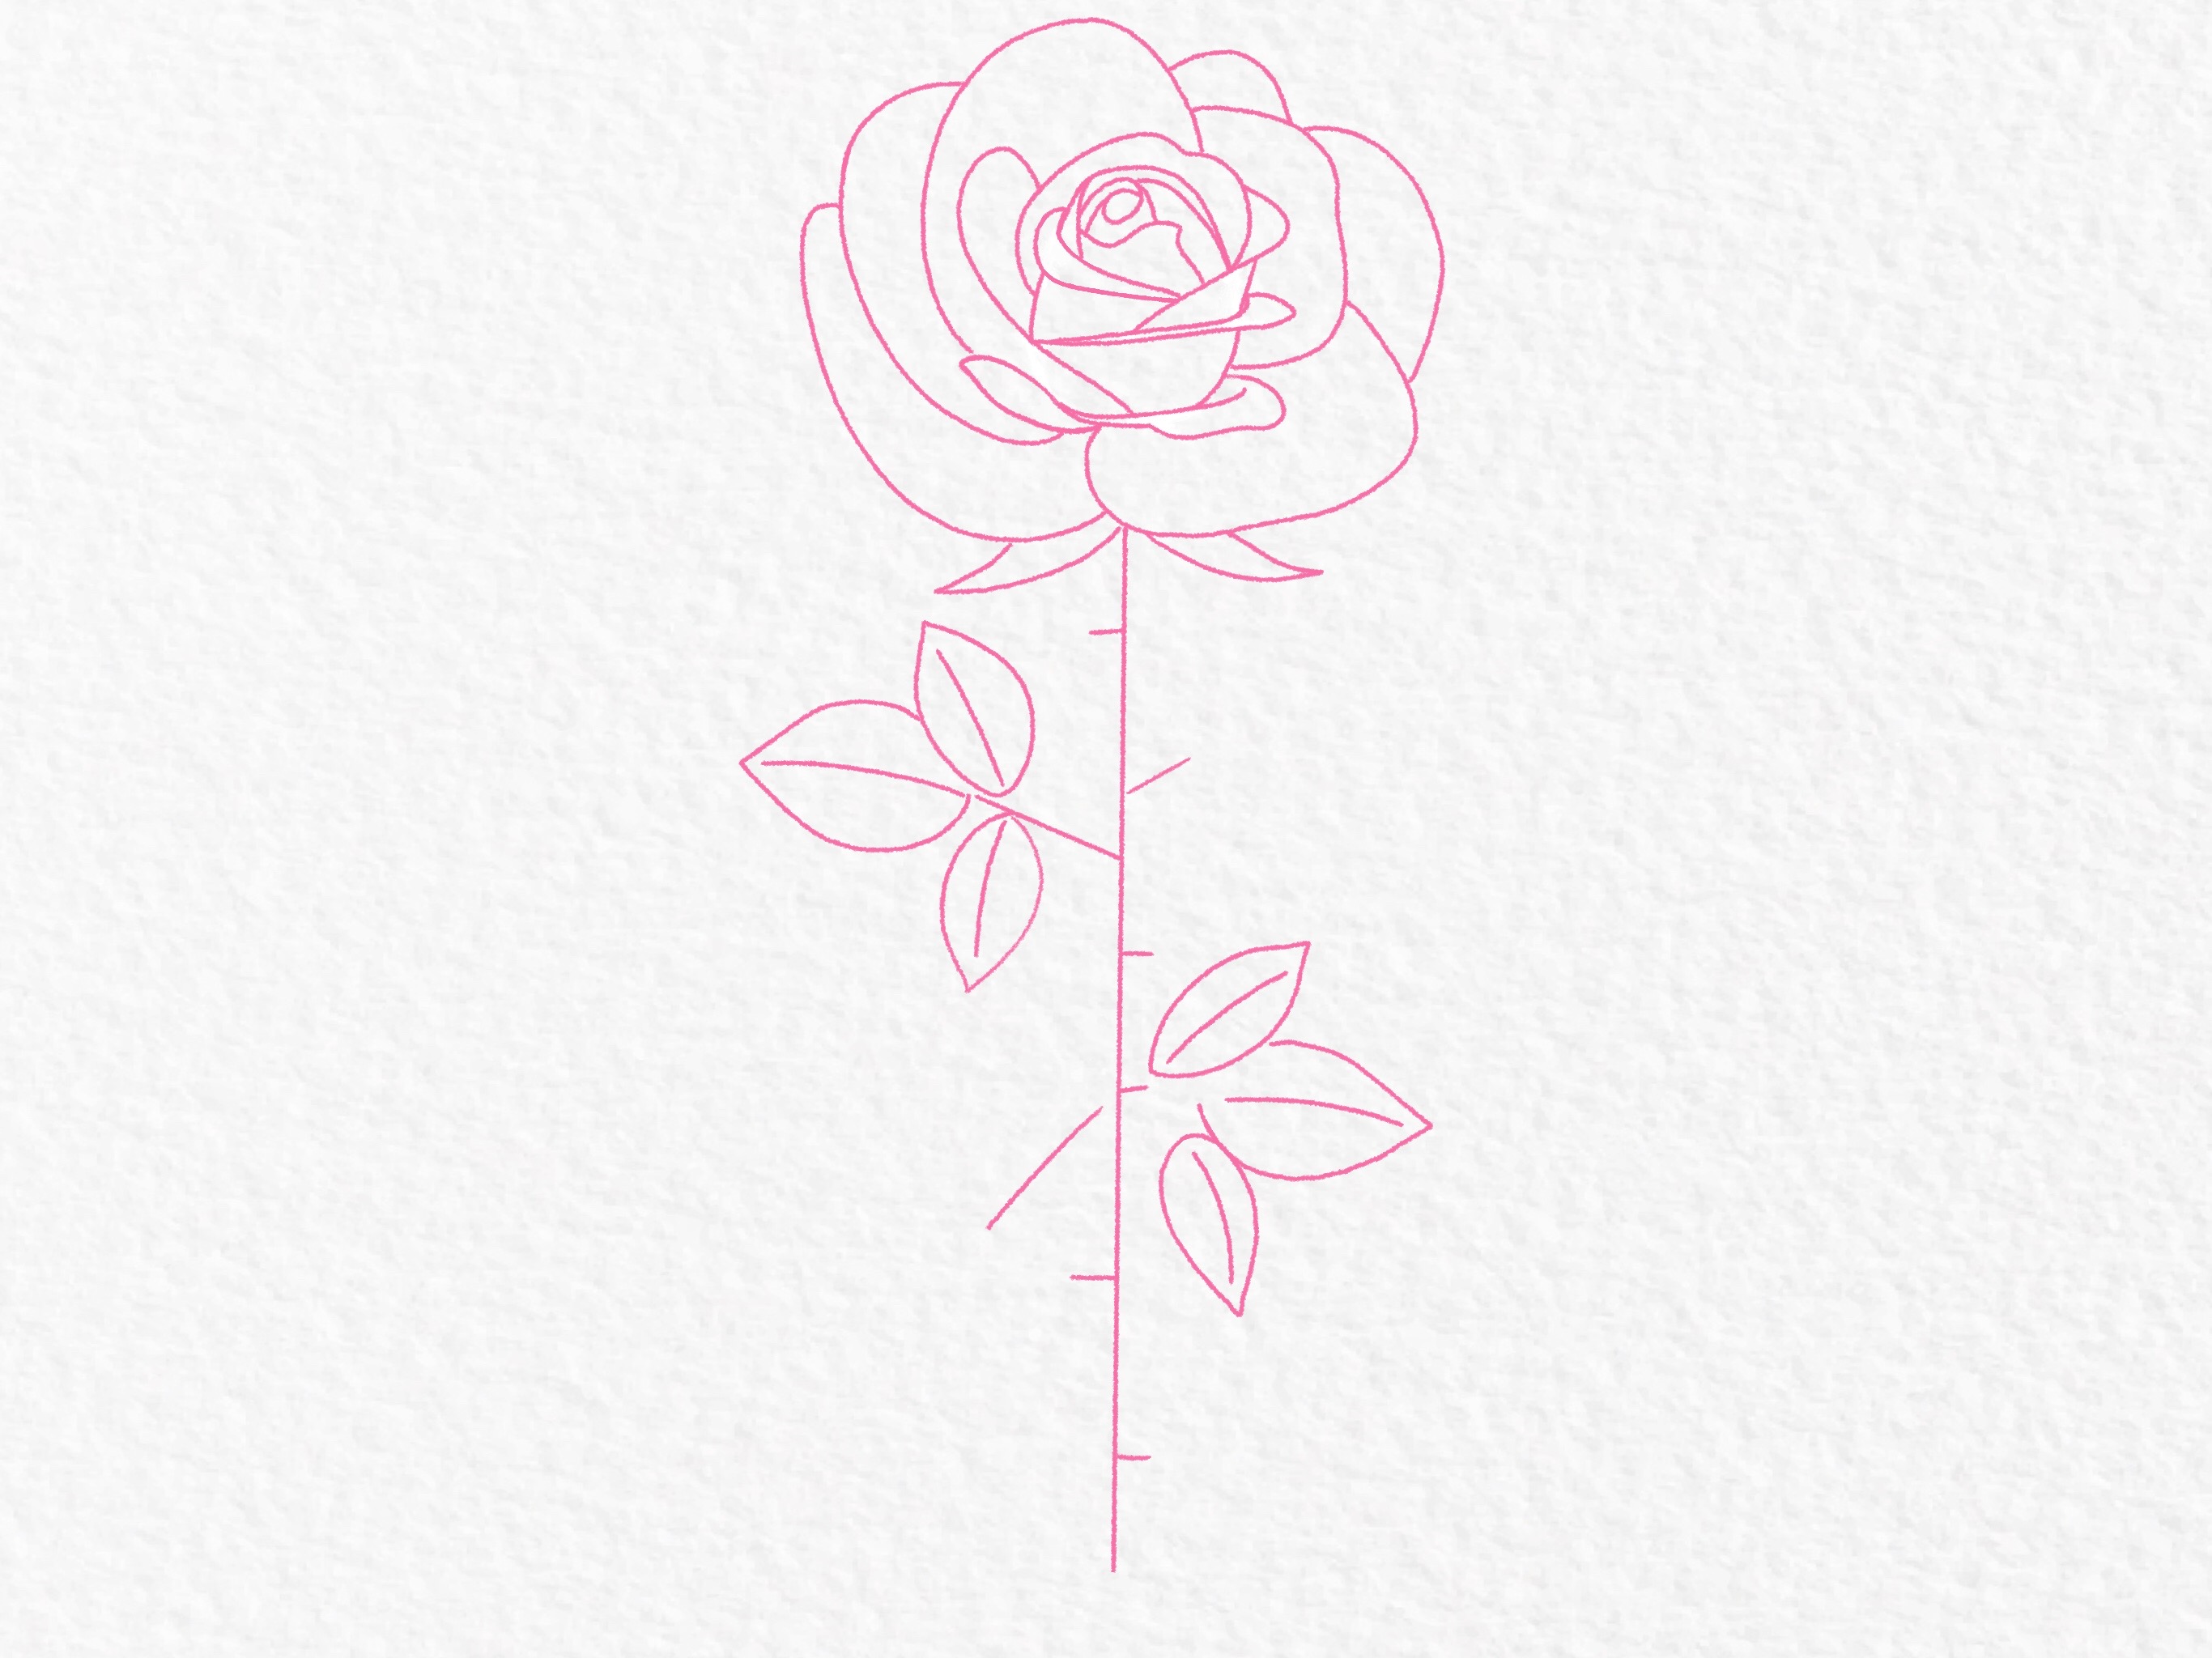 How to draw a rose, step by step drawing tutorial - step 25